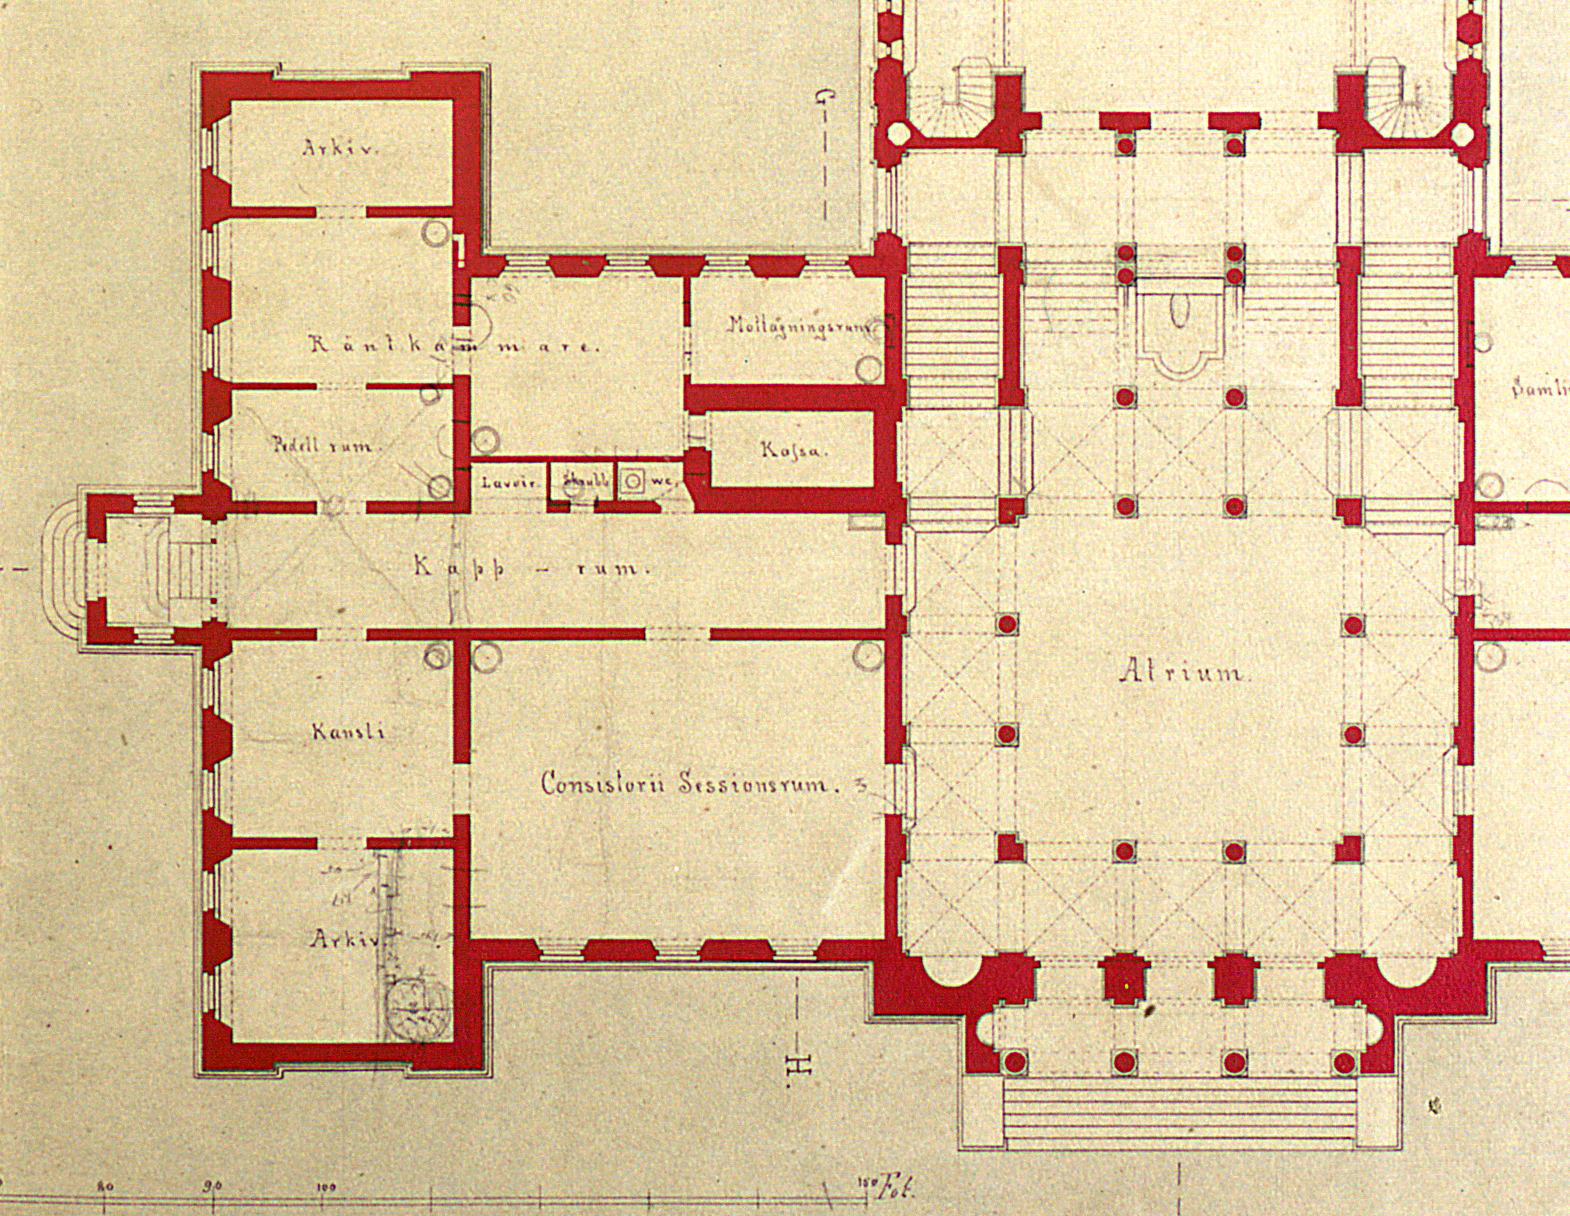 Excerpt from Helgo Zetterval’s original drawings of the main University building from 1874